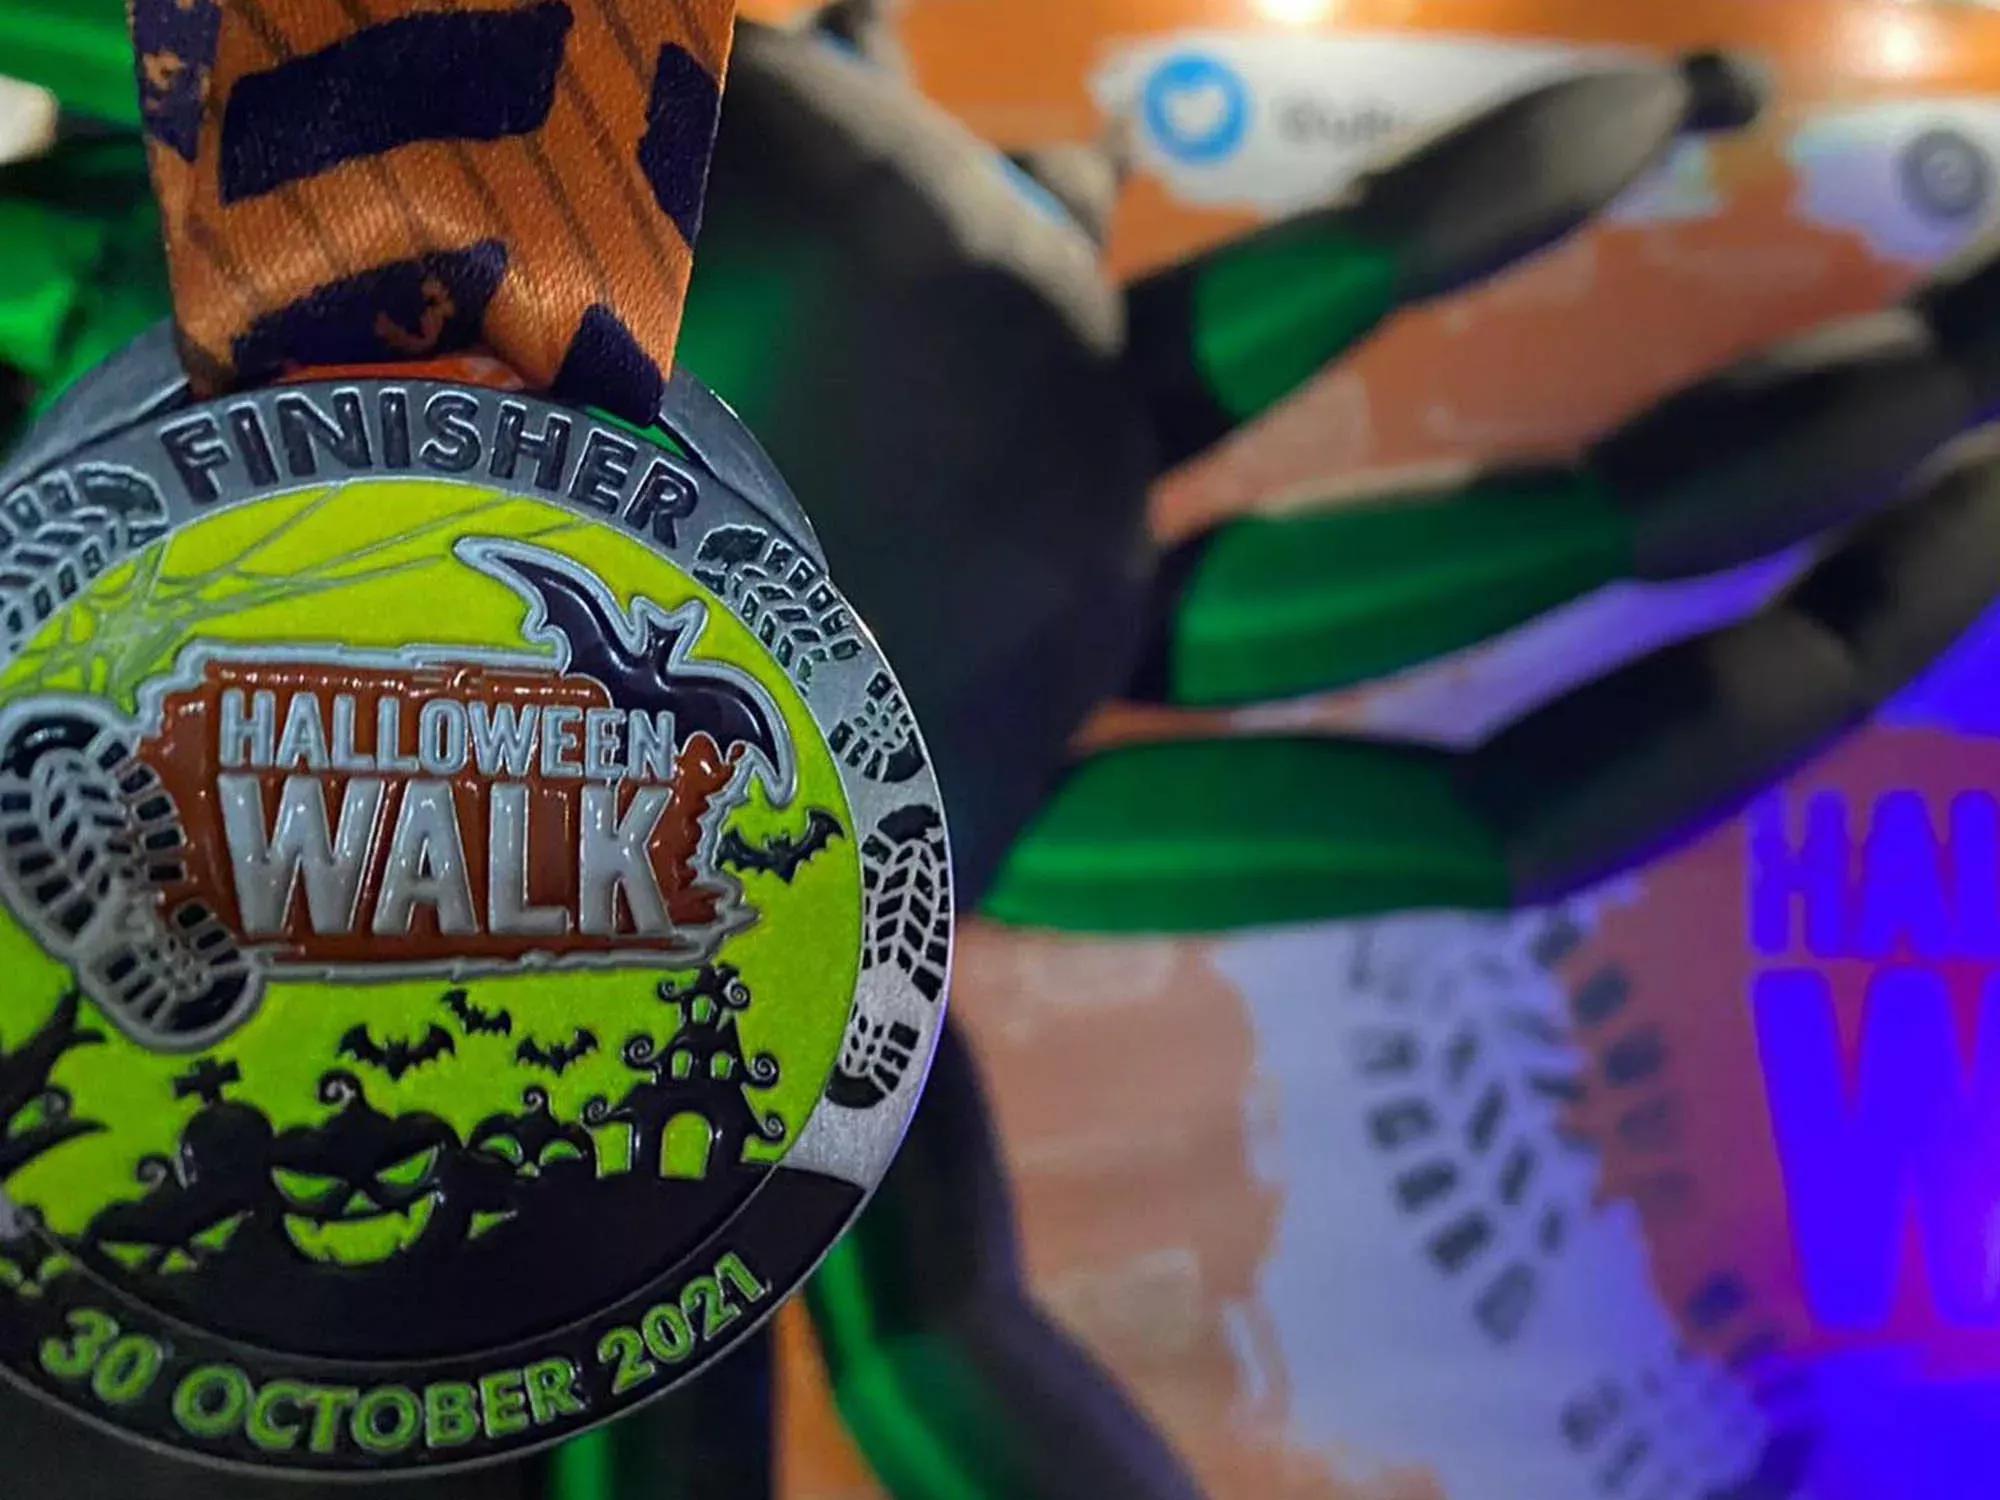 Photo of a medal which says 'Halloween Walk' on the front